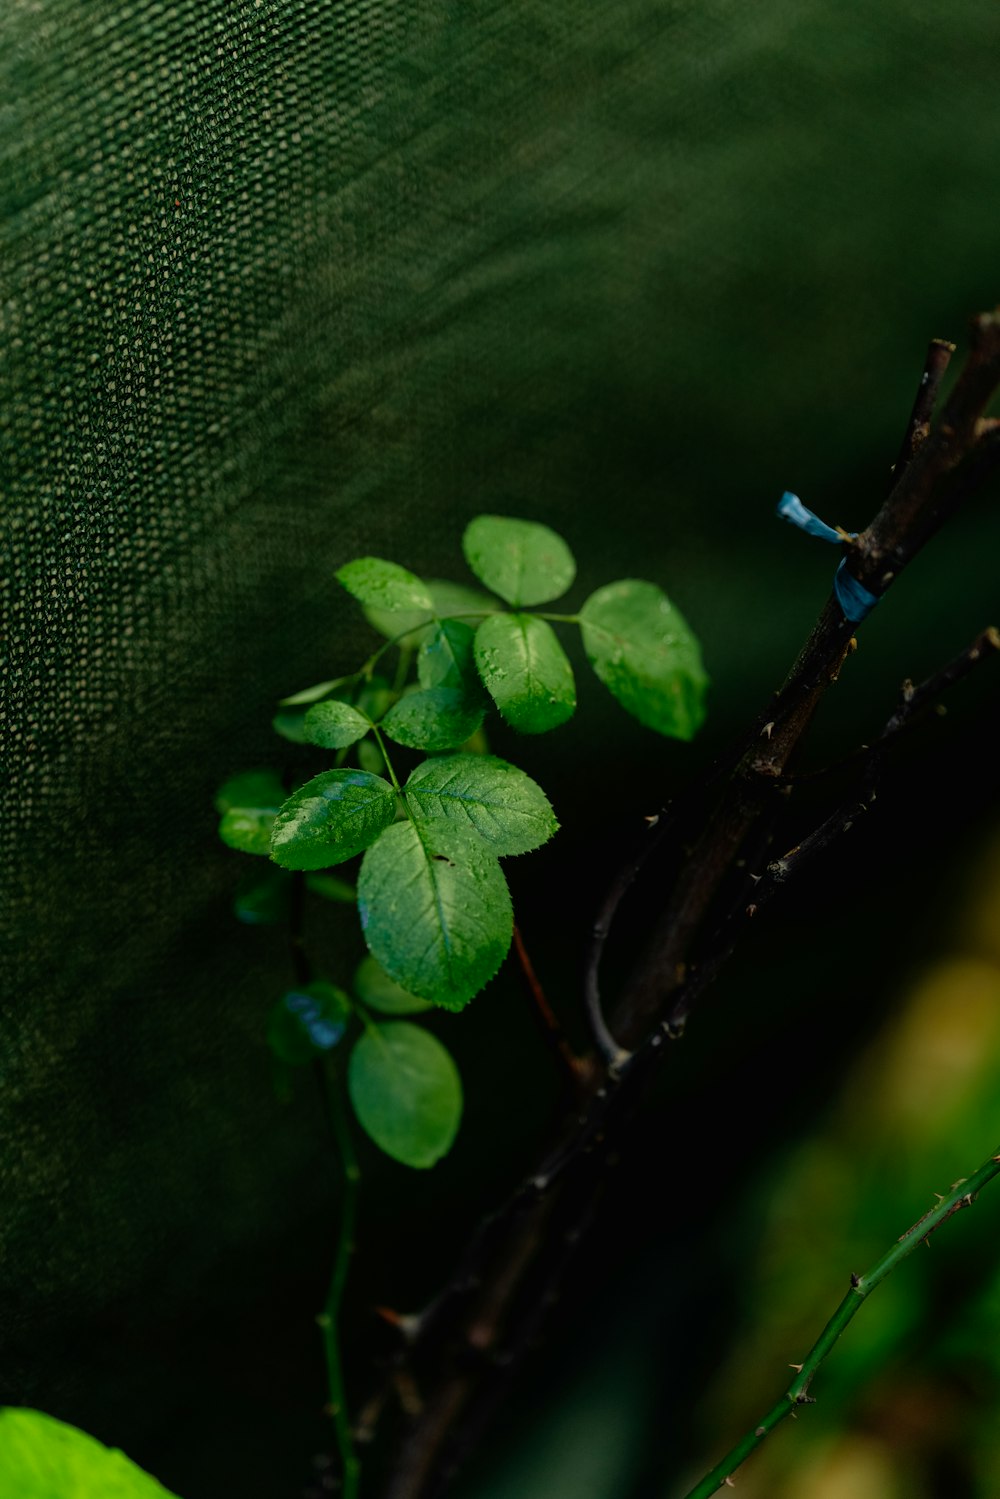 a small green plant is growing on a branch